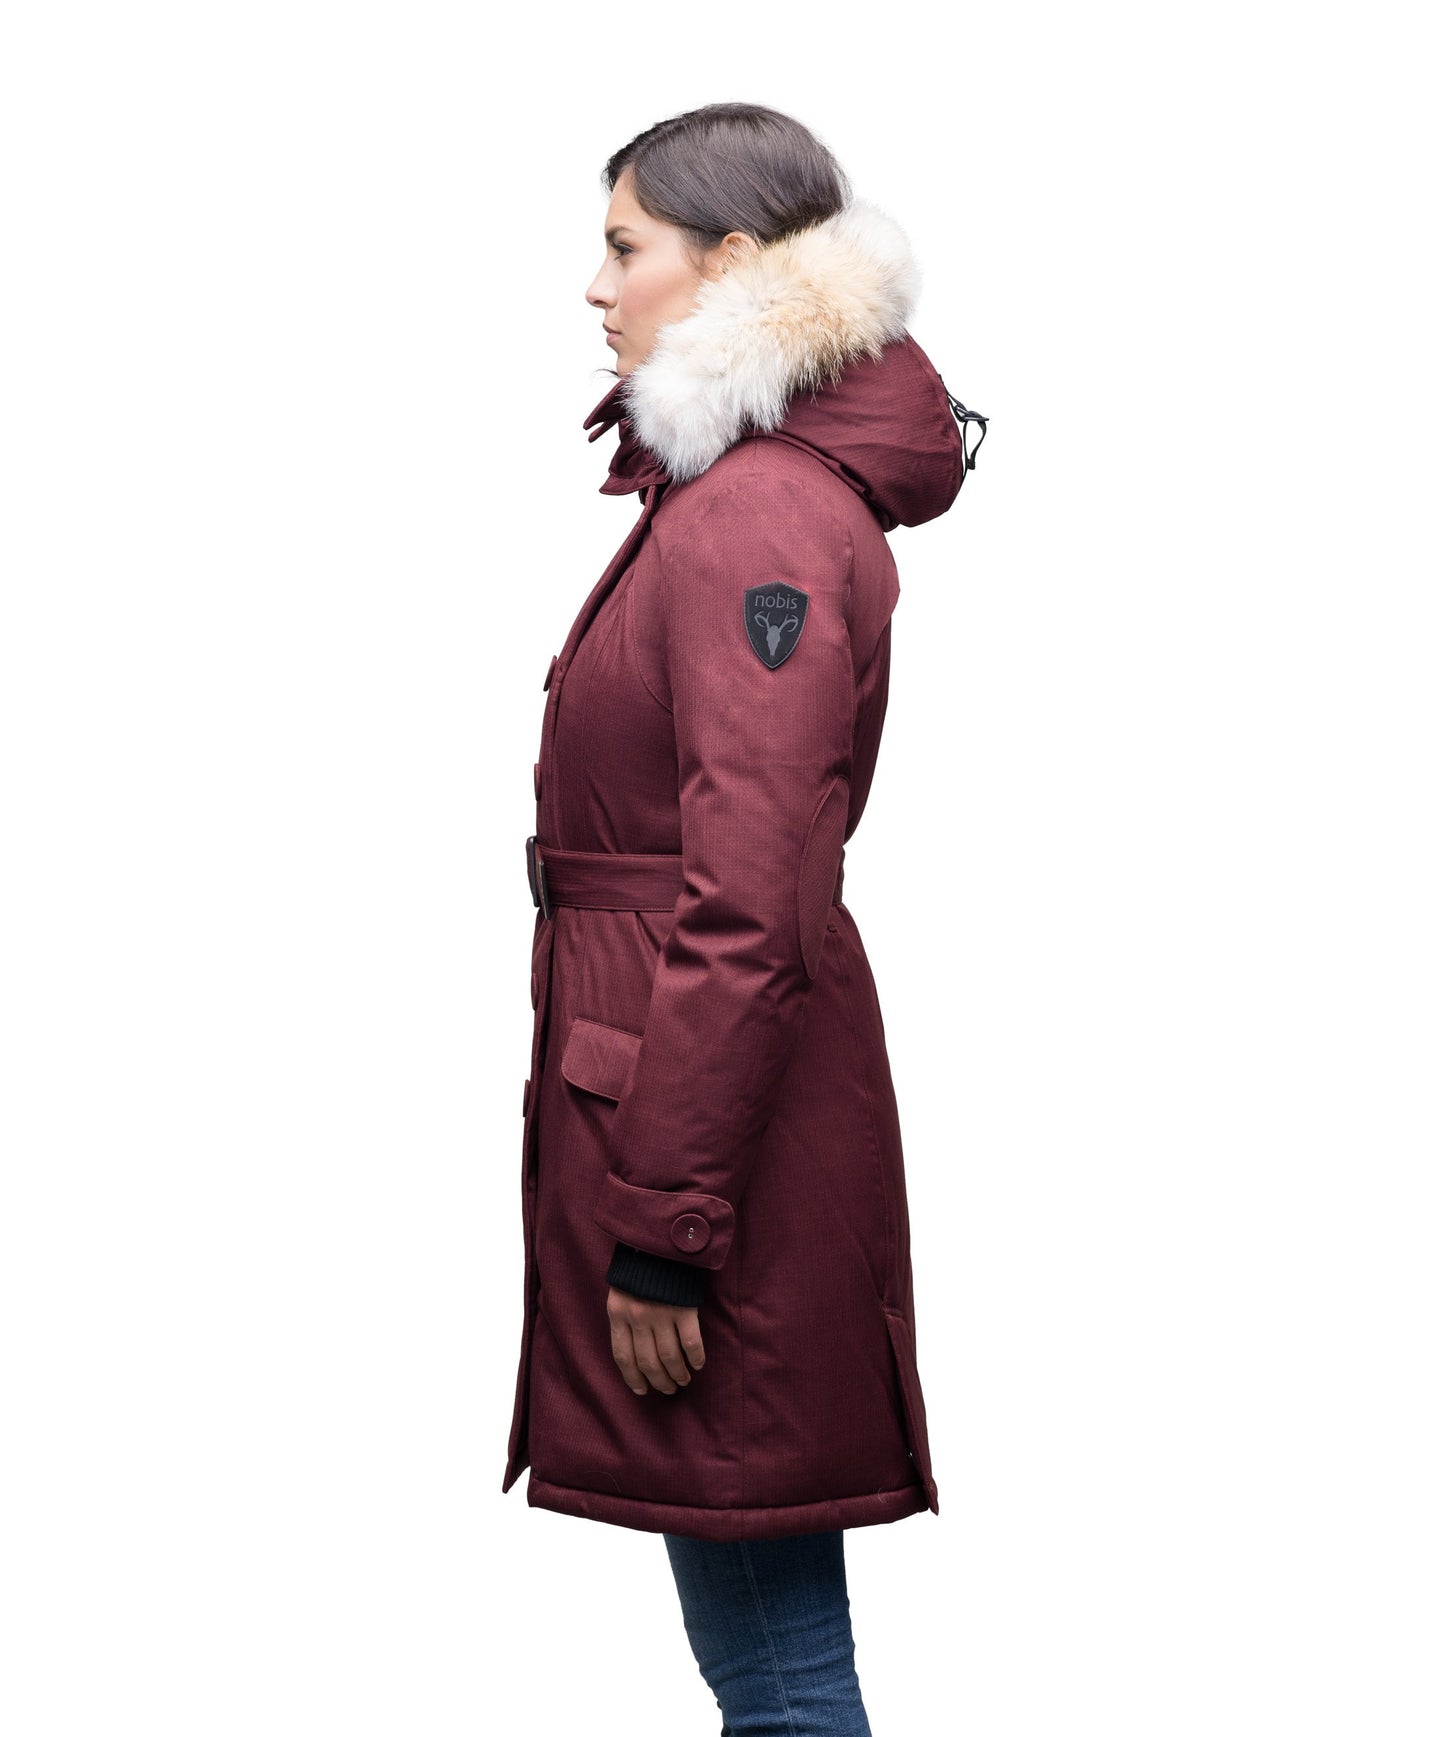 Women's down filled double breasted peacoat with a belted waist in CH Red Rum